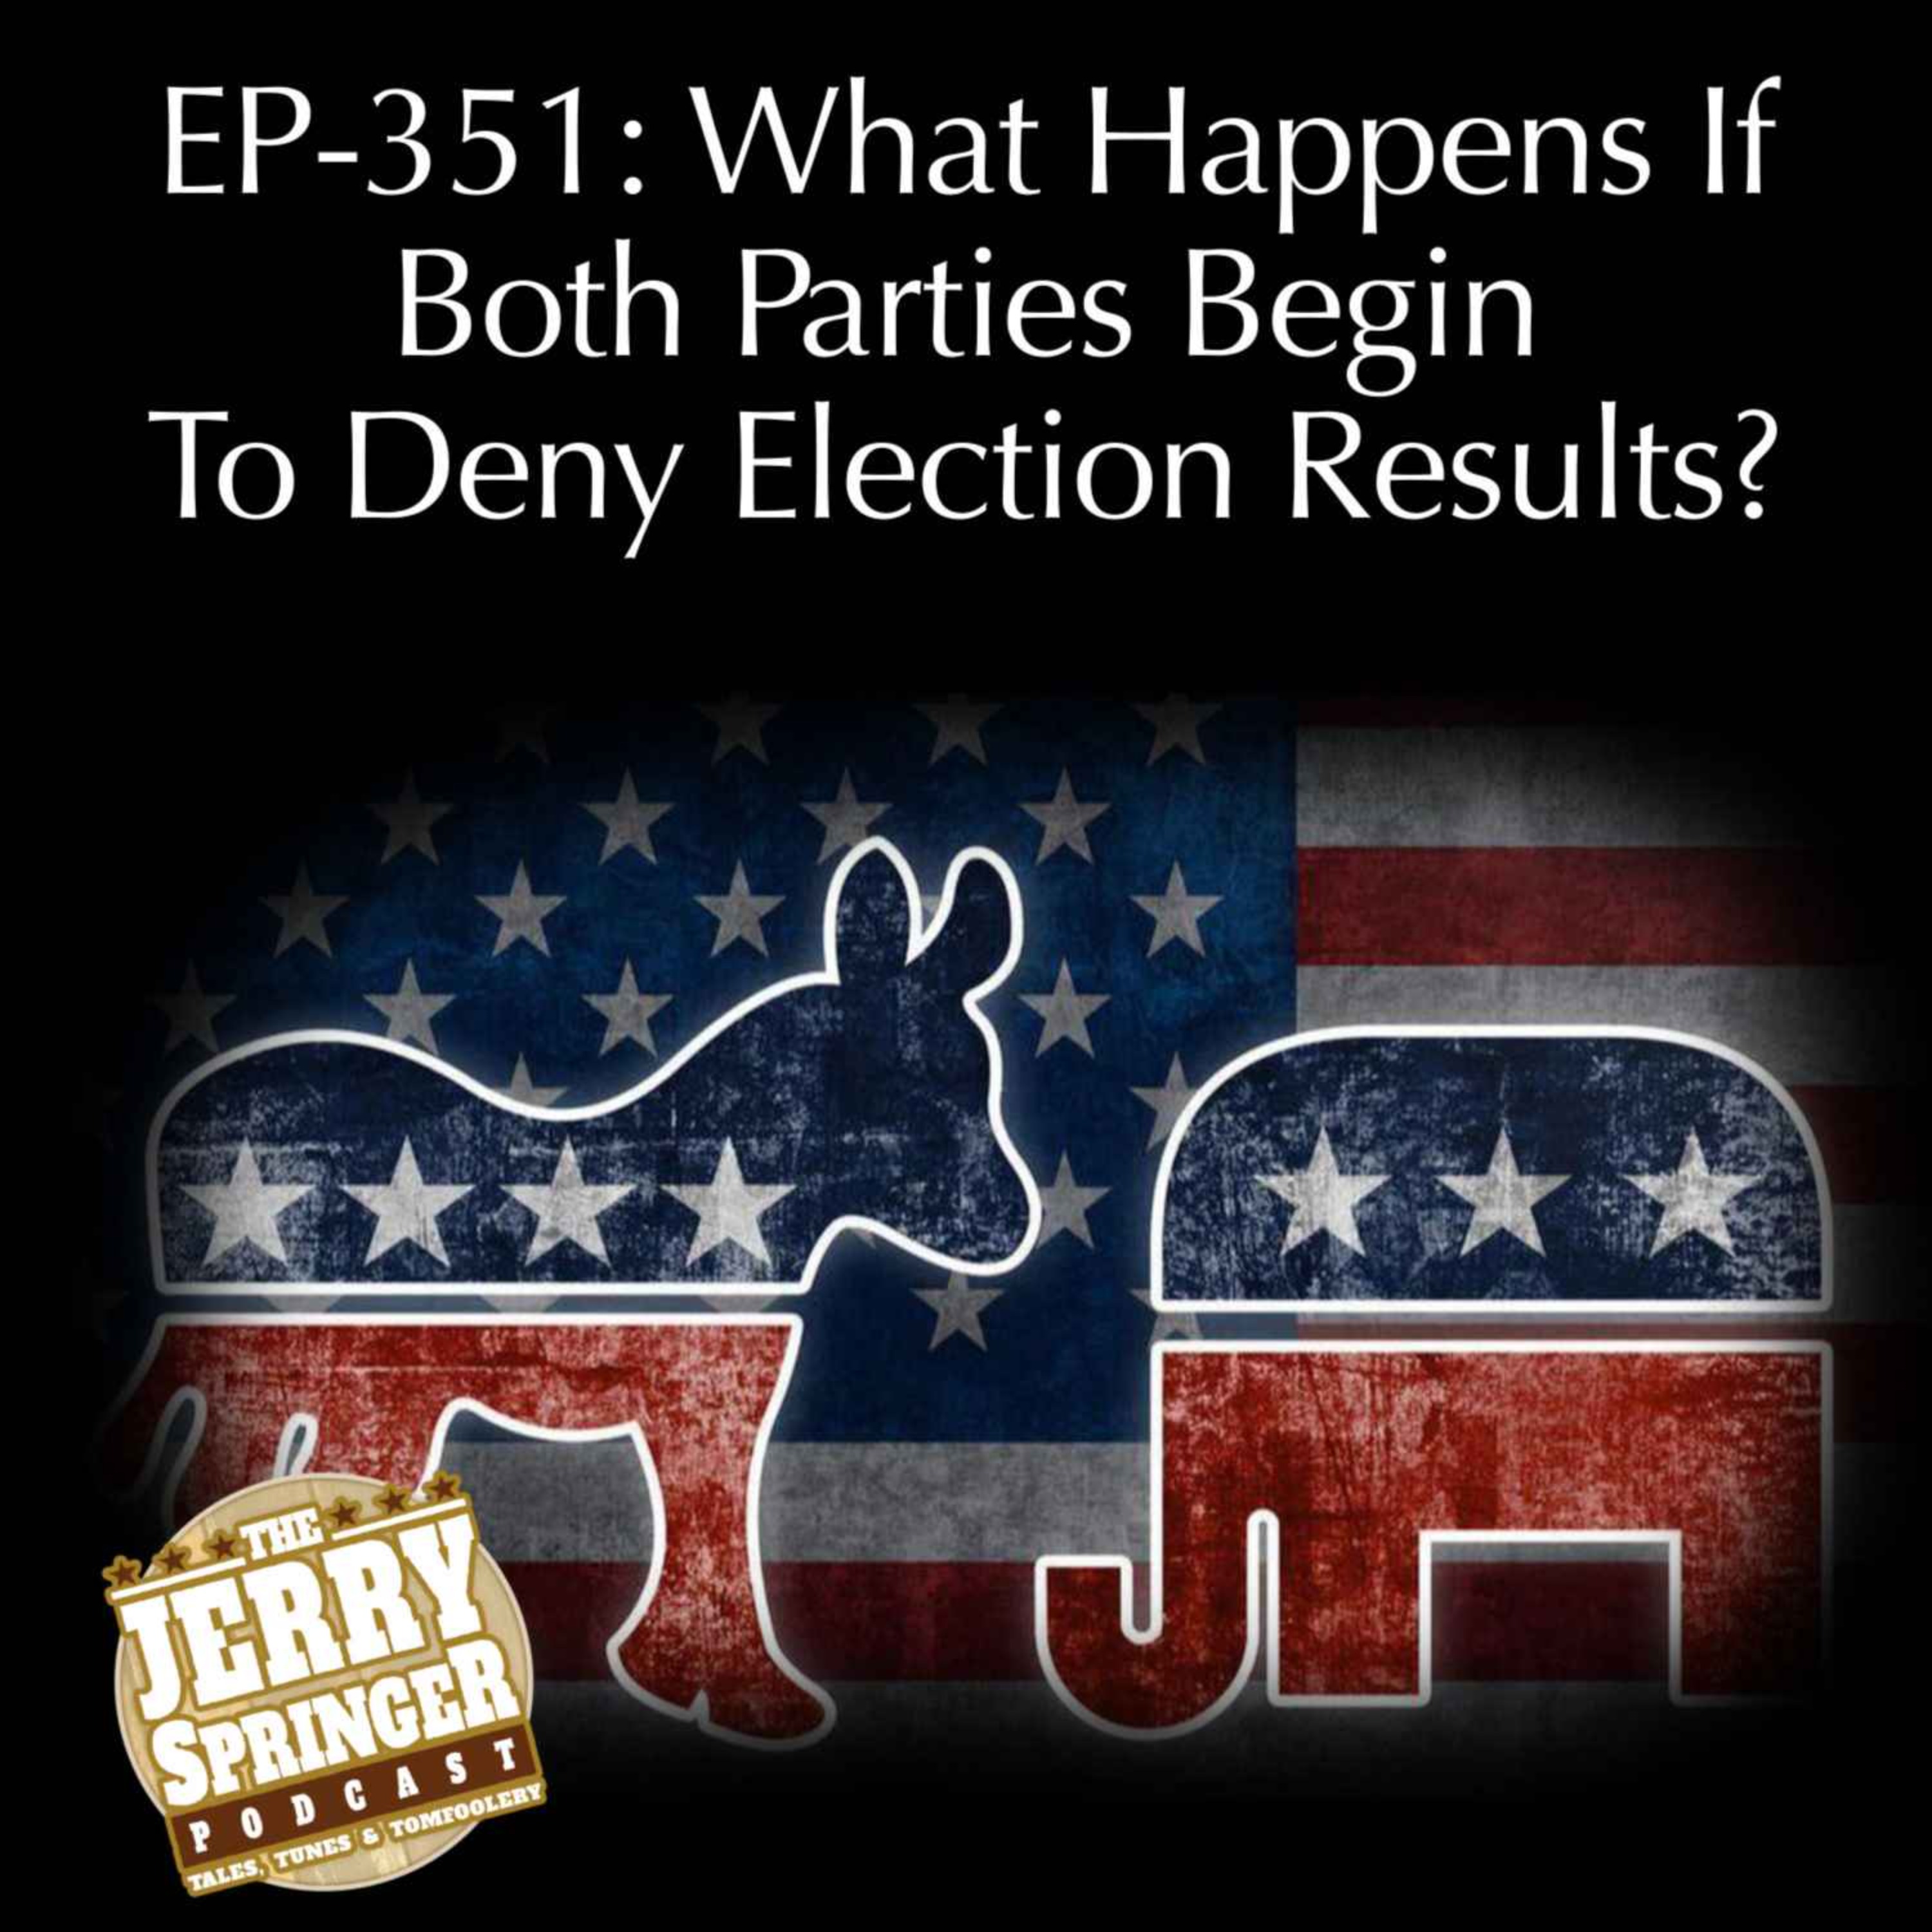 What Happens If Both Parties Begin To Deny Election Results? EP -351